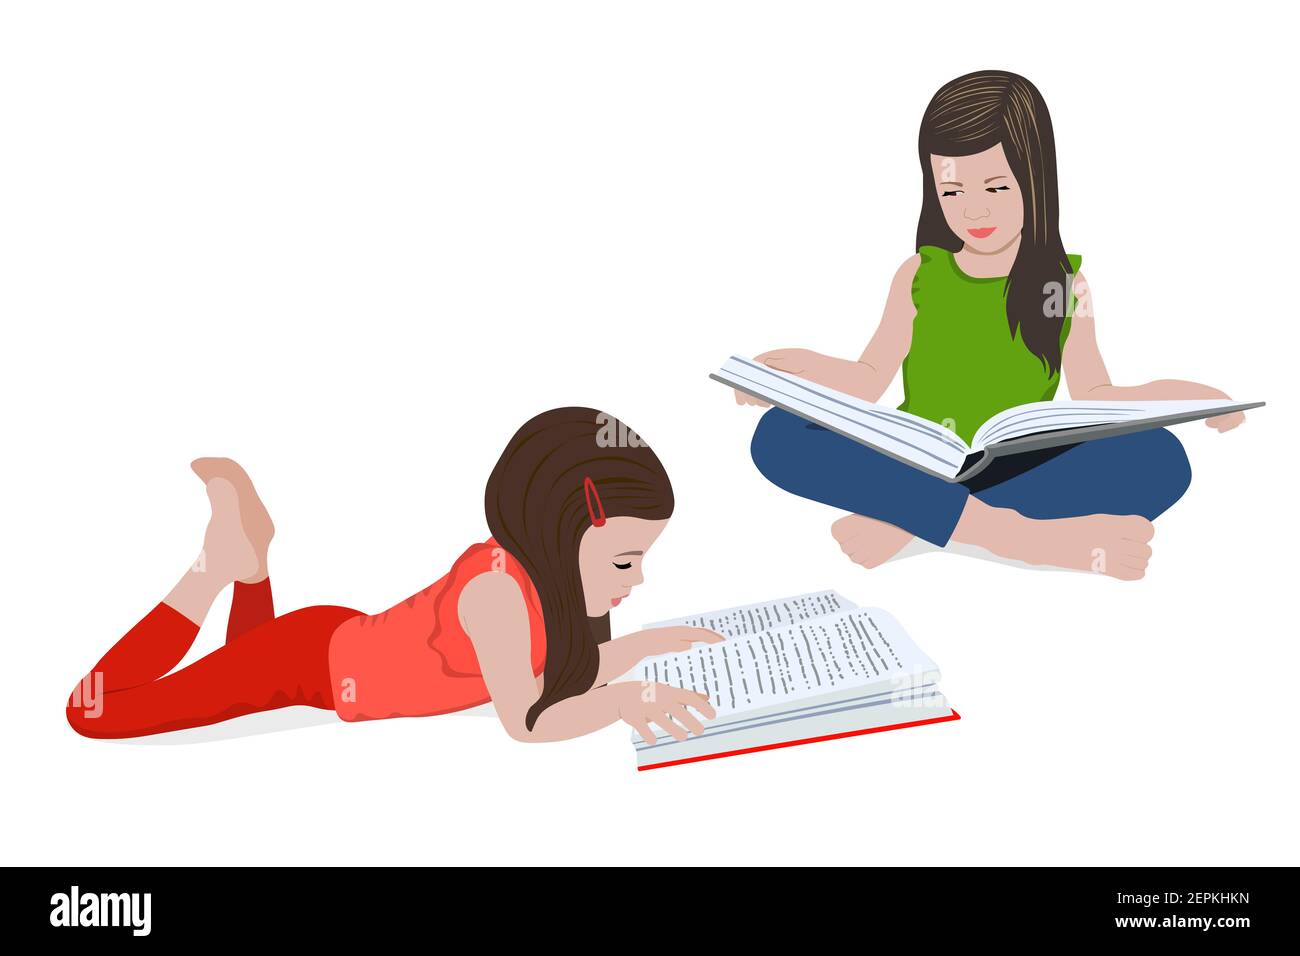 Little girl reads a book. Set of illustrations. Distance learning. Home education. School girl girl doing homework. Child with a book in her hands Stock Vector